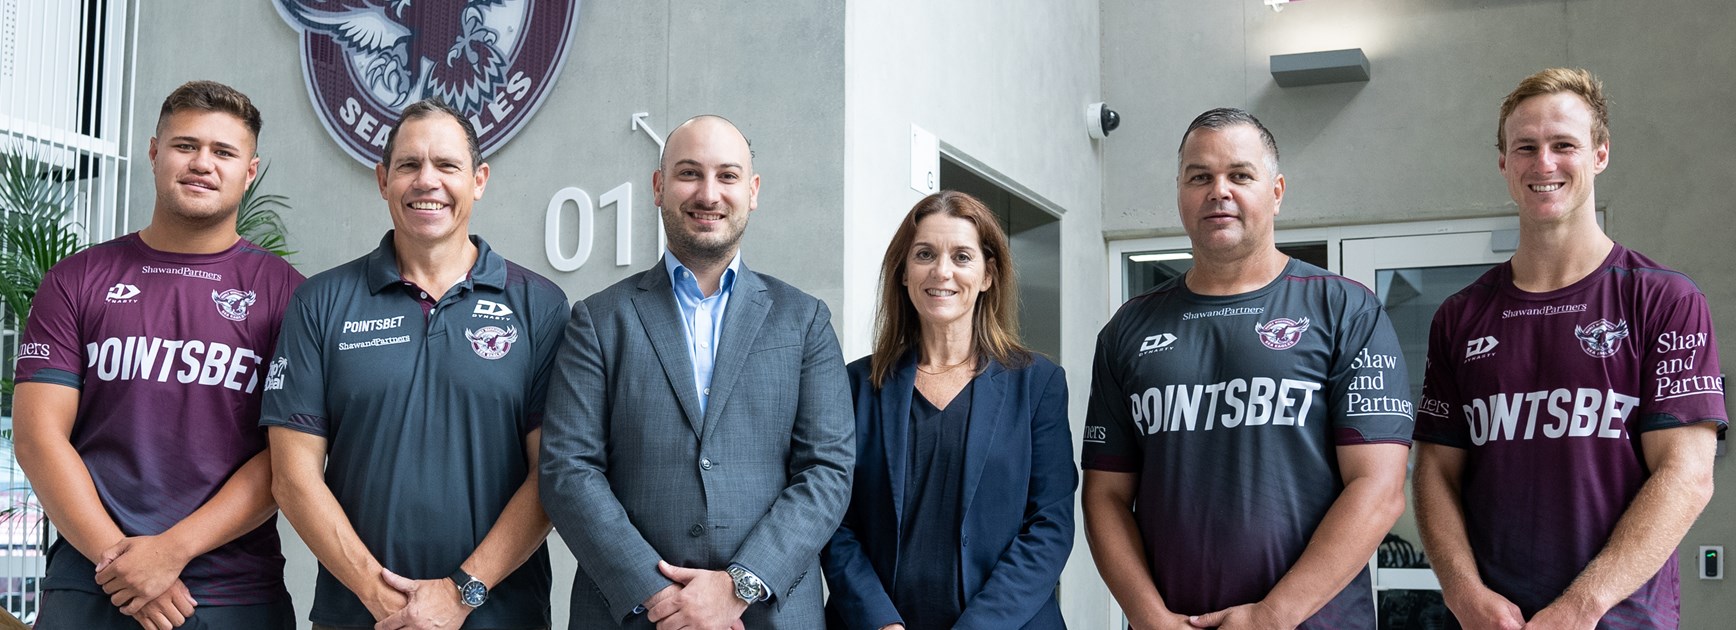 United...(l-r) Josh Schuster, Sea Eagles CEO Tony Mestrov, Manly Leagues Club CEO Julien Bova, Manly Leagues Club Chairwoman Julie Sibraa, Coach Anthony Seibold, and Captain Daly Cherry-Evans.